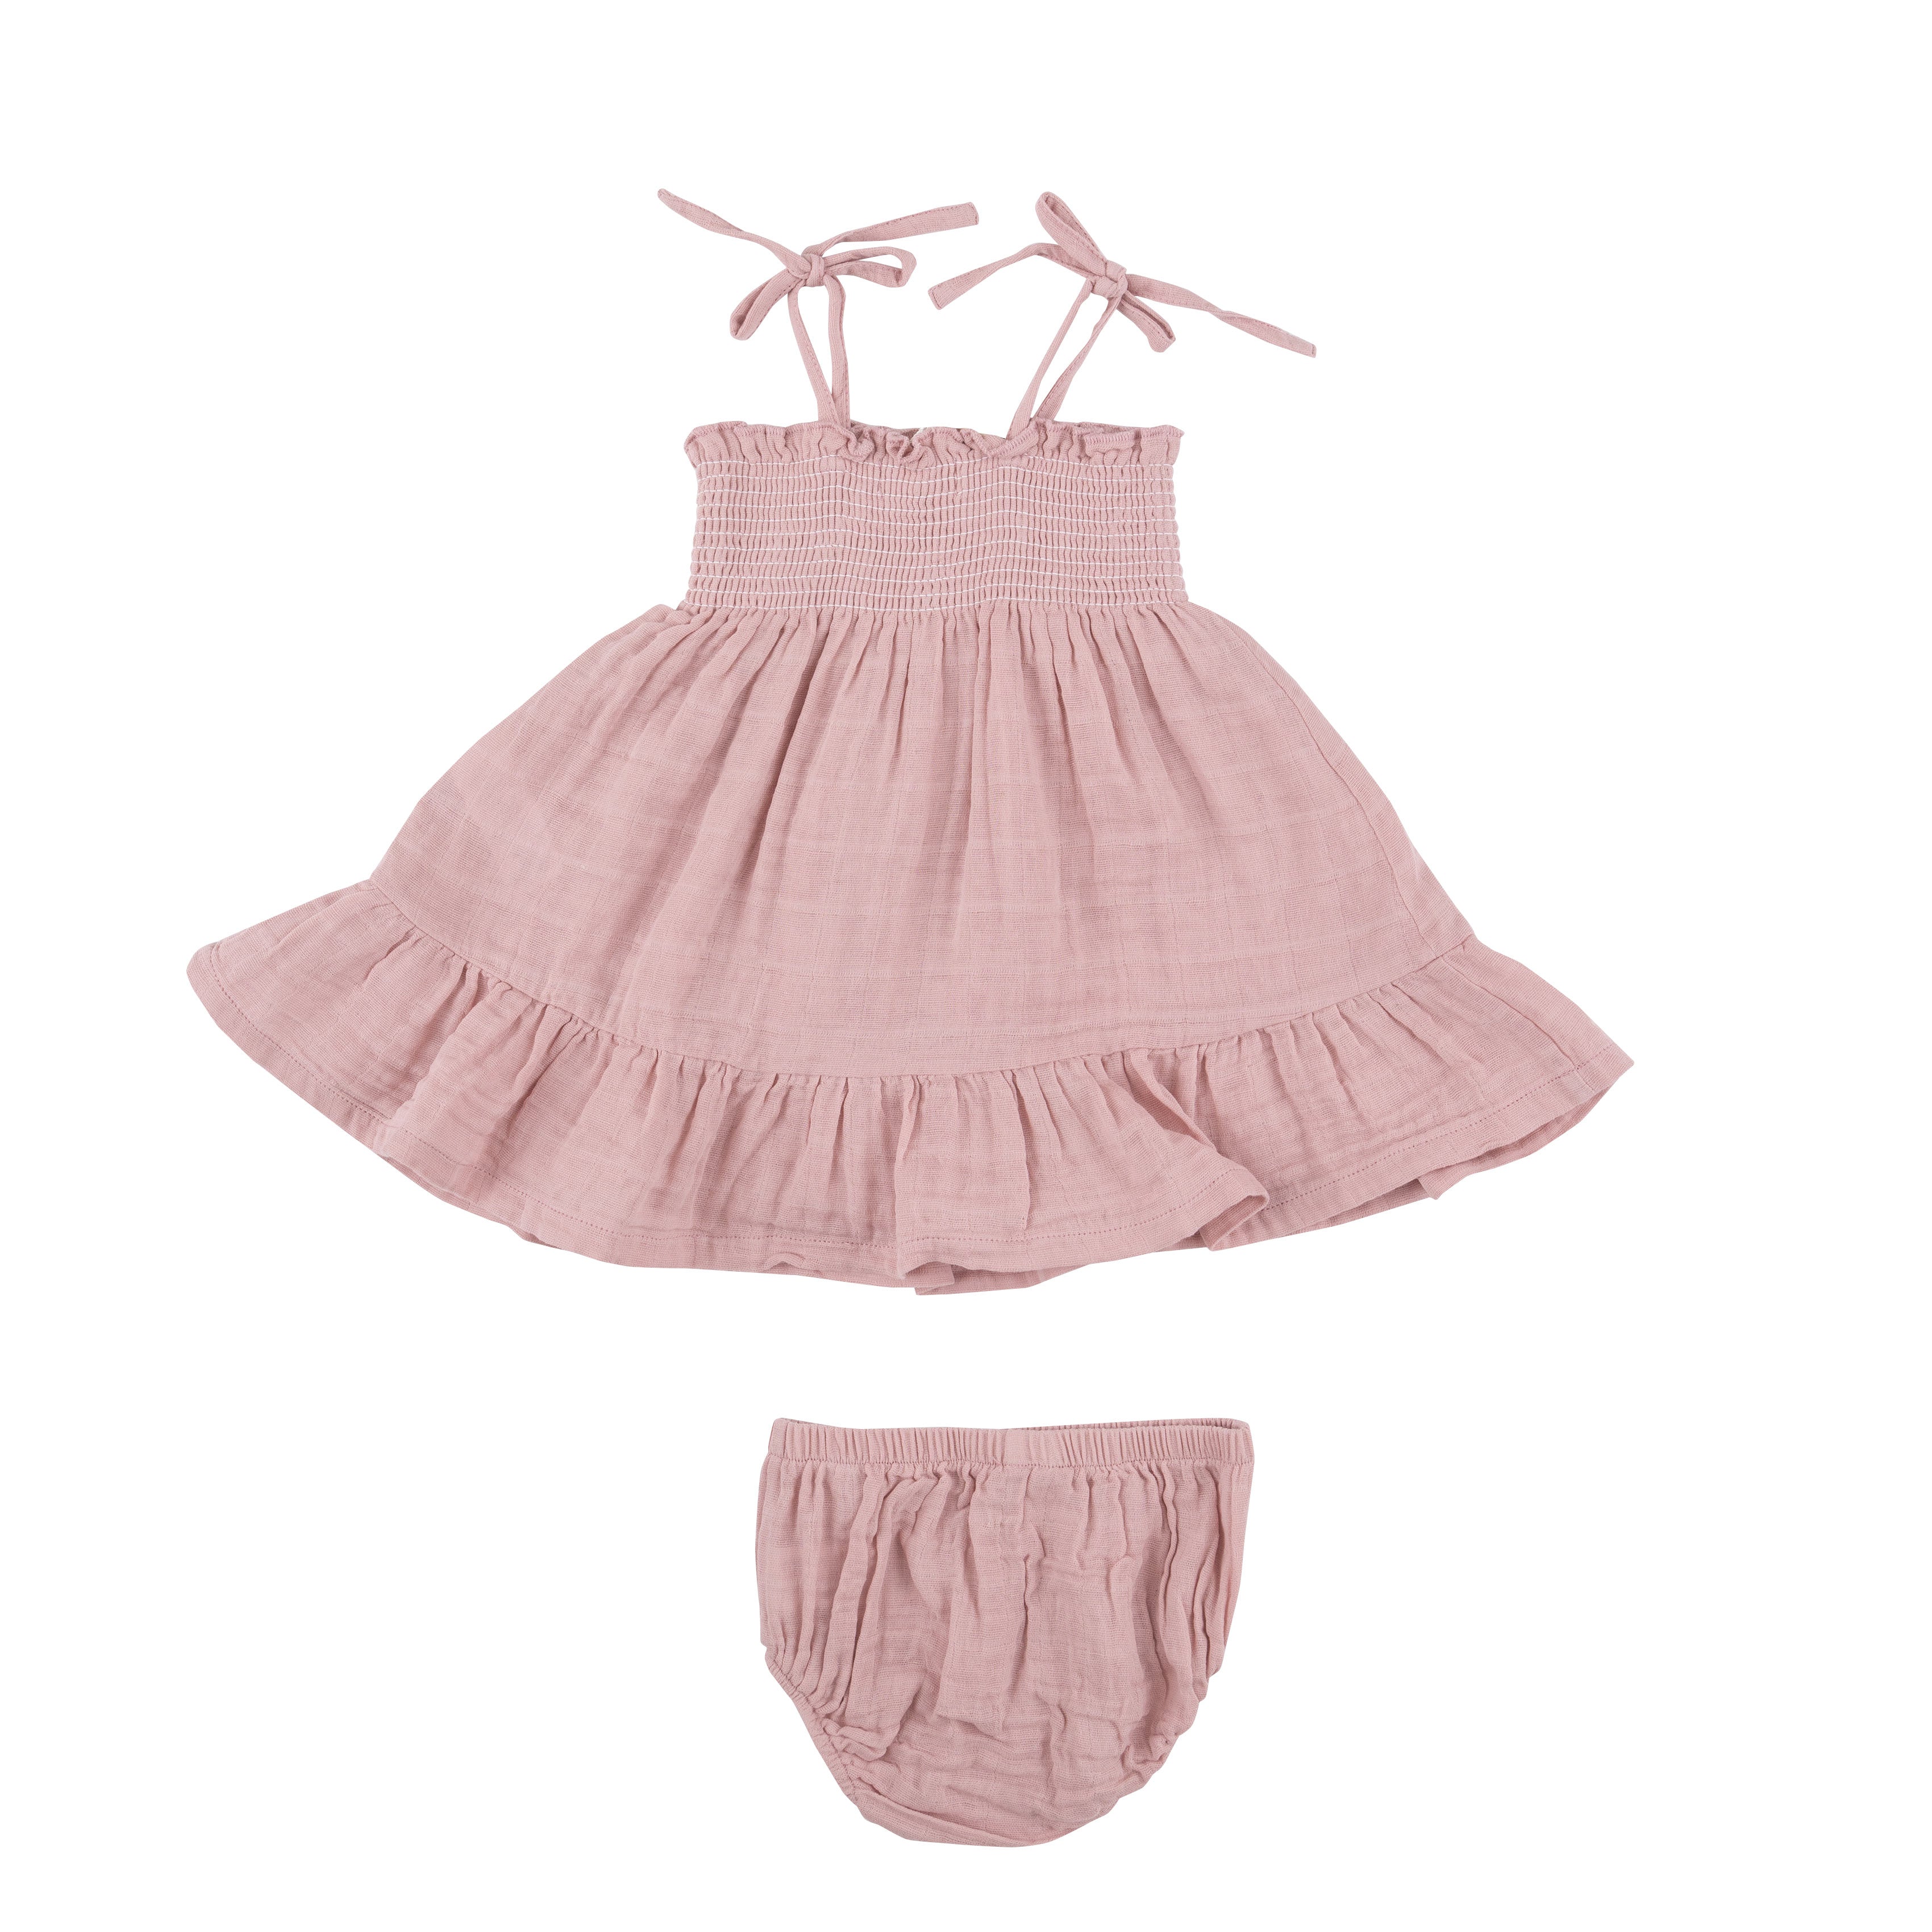 Tie Strap Smocked Sun Dresss Diaper Cover - Dusty Pink Solid Muslin